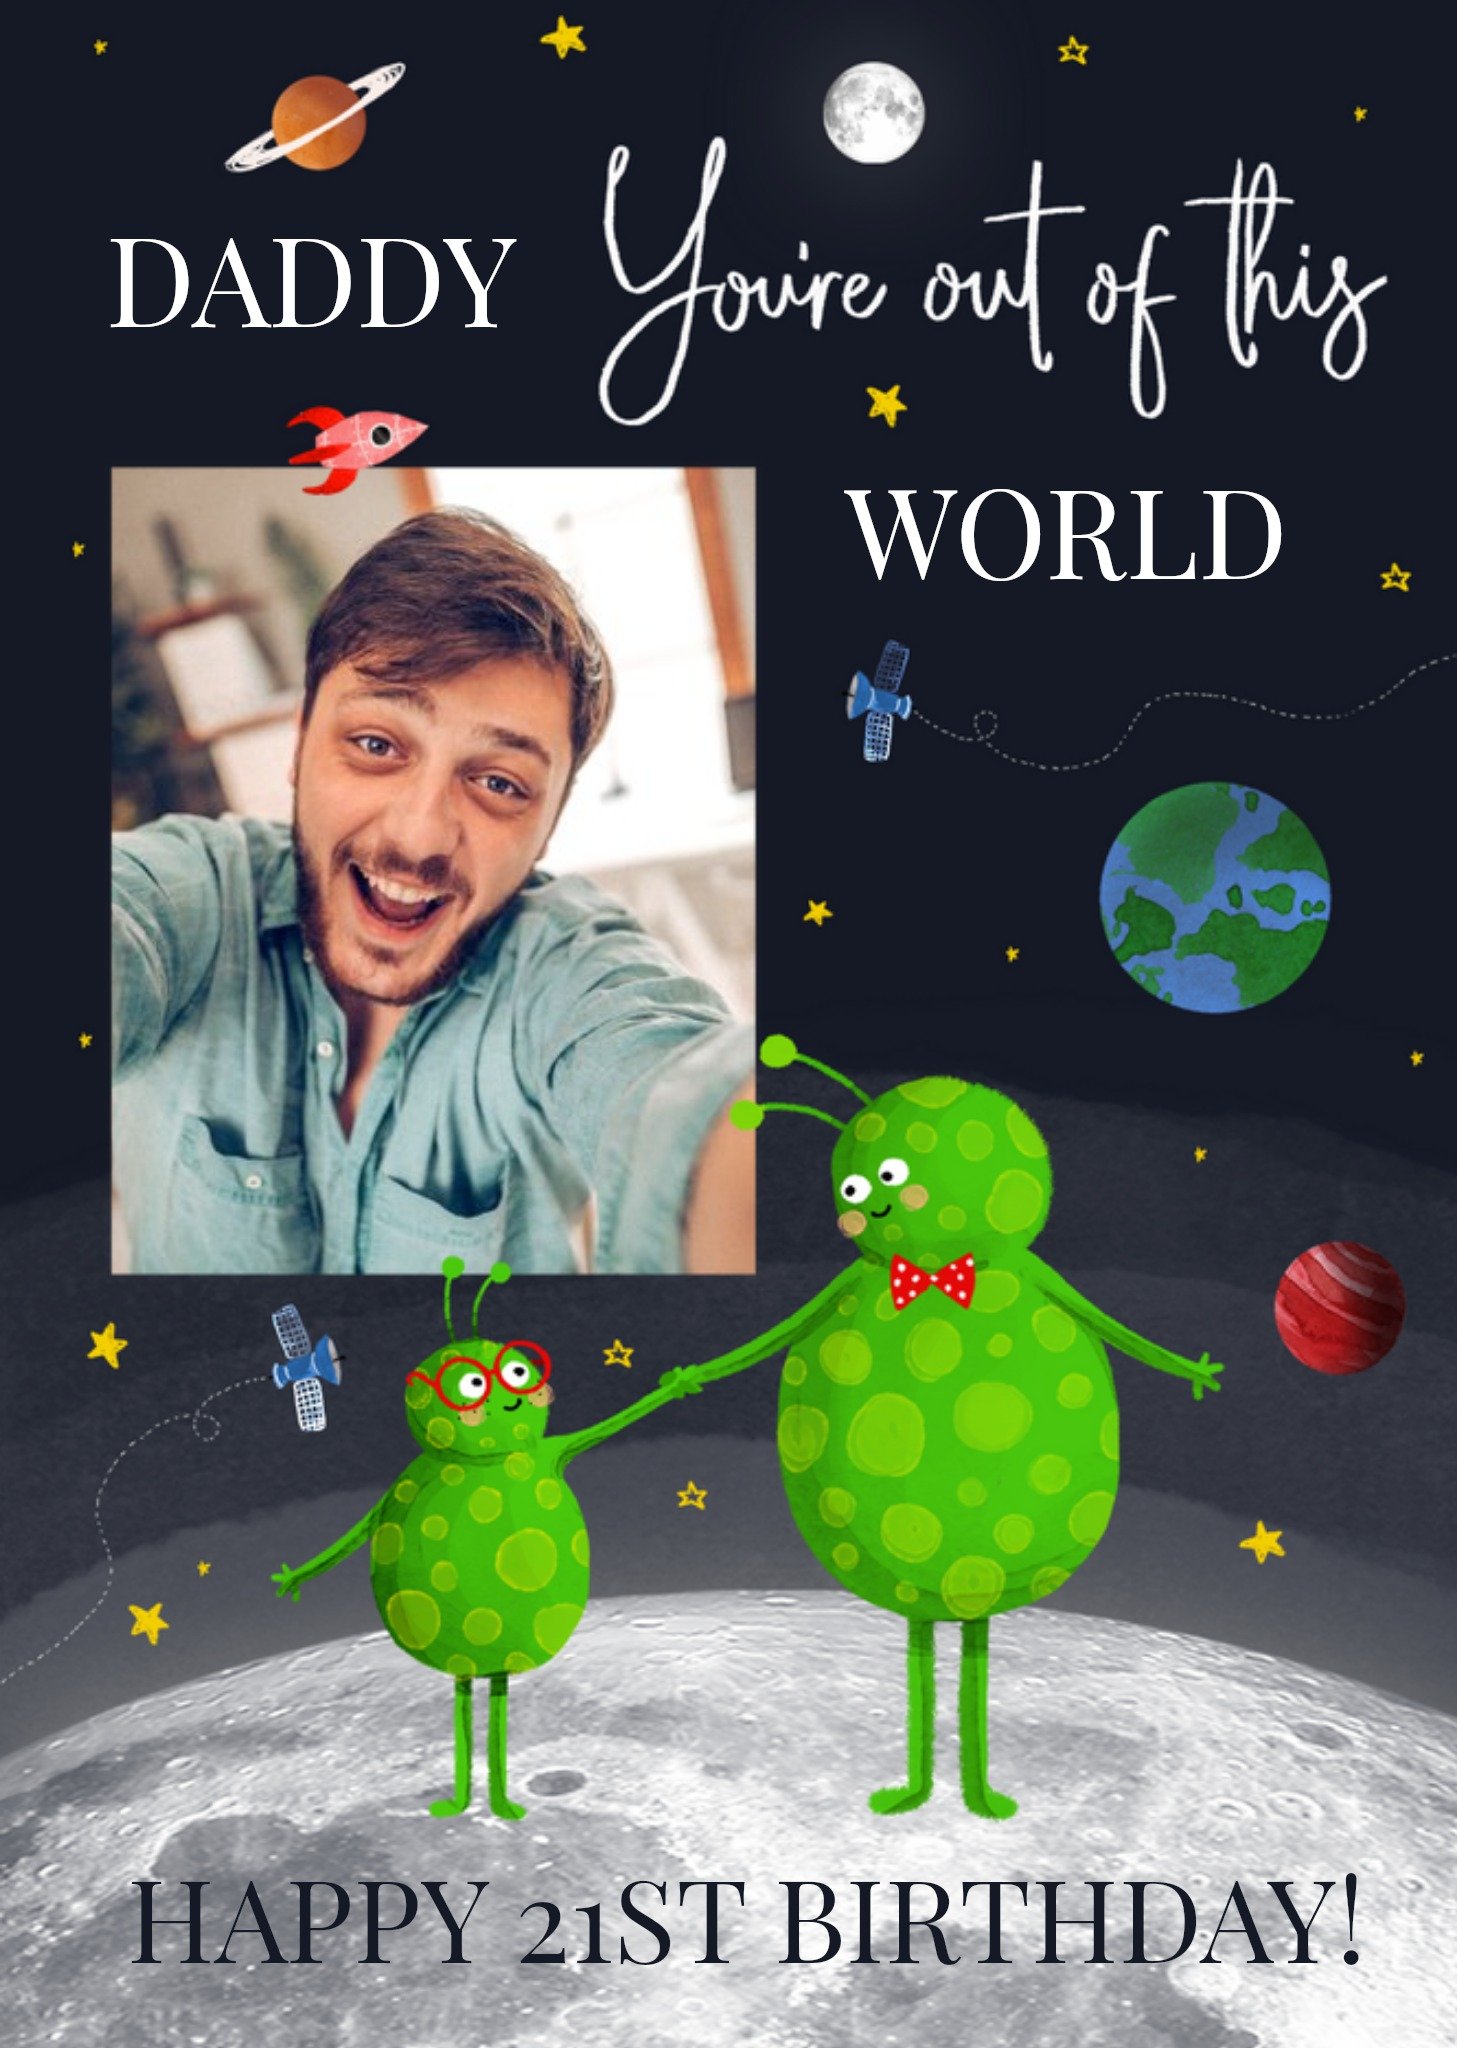 Making Meadows Okey Dokey Illustrated Aliens Happy 21st Birhday Daddy You're Out Of This World Photo